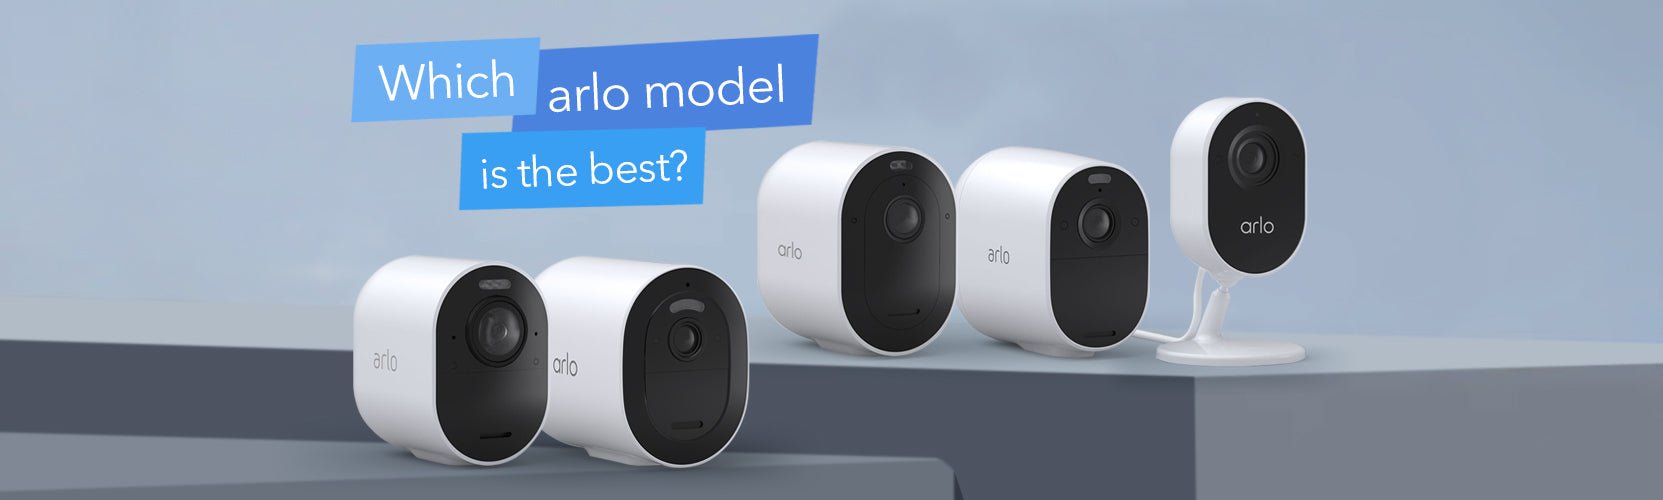 Arlo camera comparison: pros and cons + the best choice